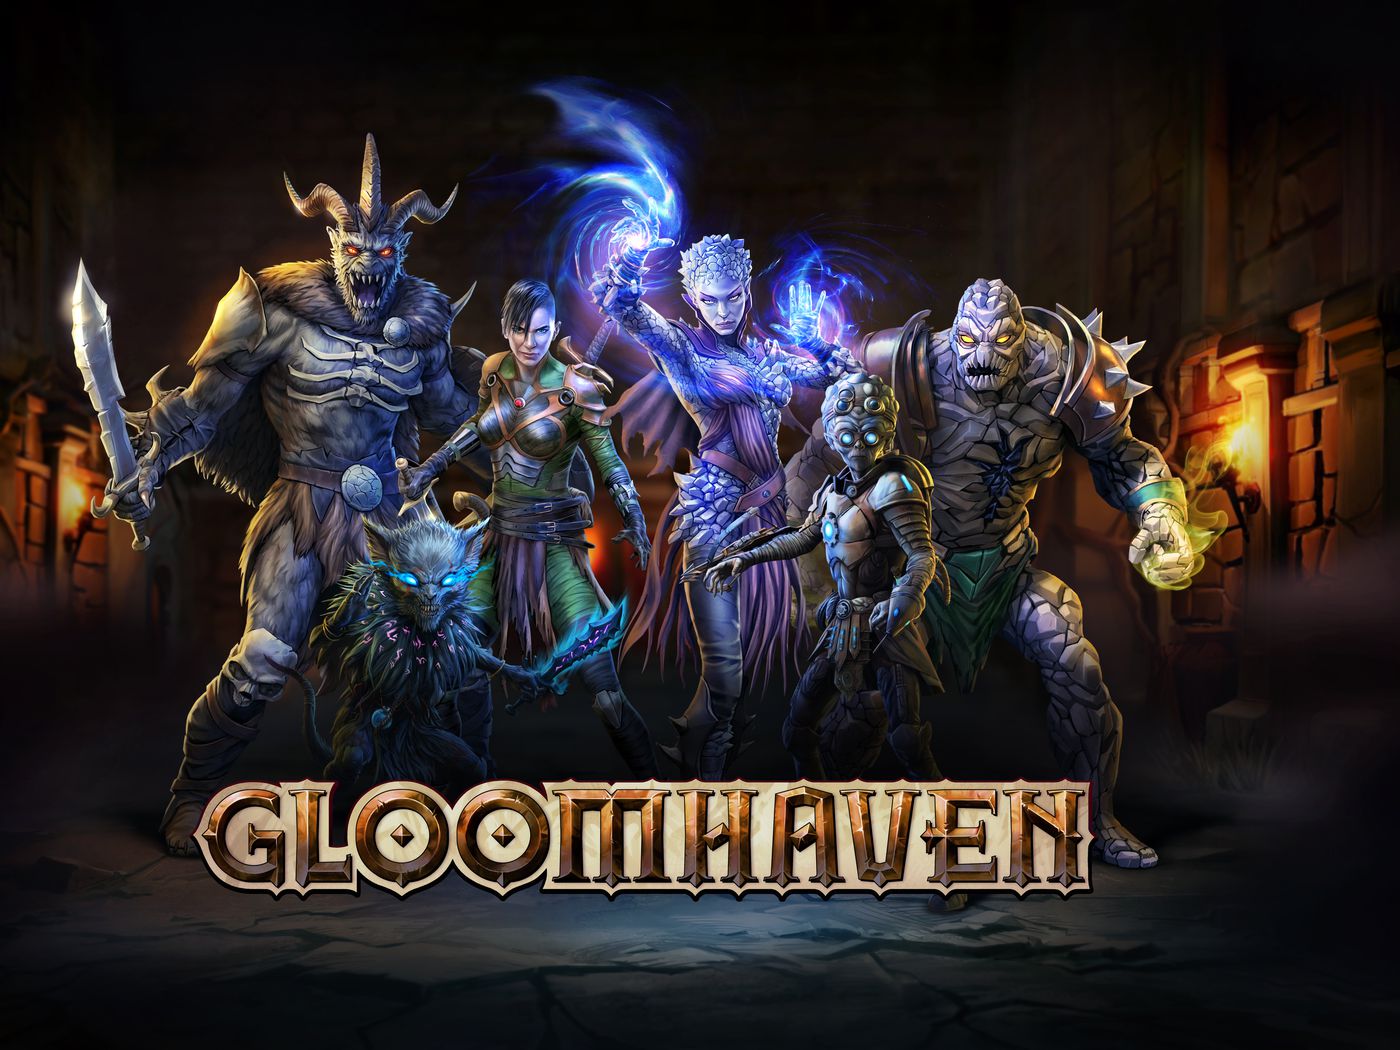 The Hit Tactical RPG Gloomhaven Launches September 18 on